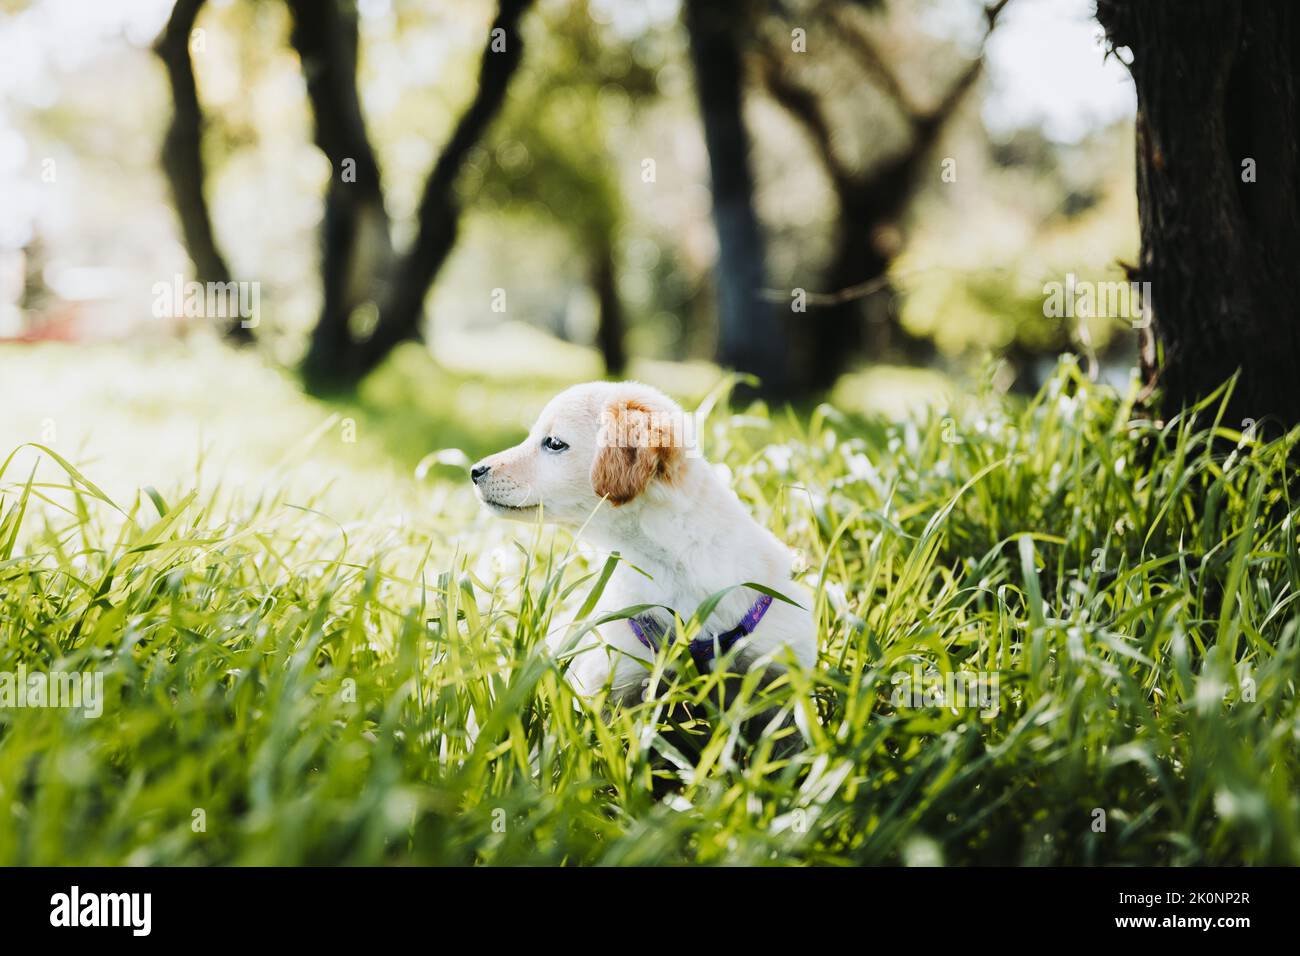 Little cute golden retriever puppy sitting on the grass and seems to be lost in the park. Depression in dogs Stock Photo